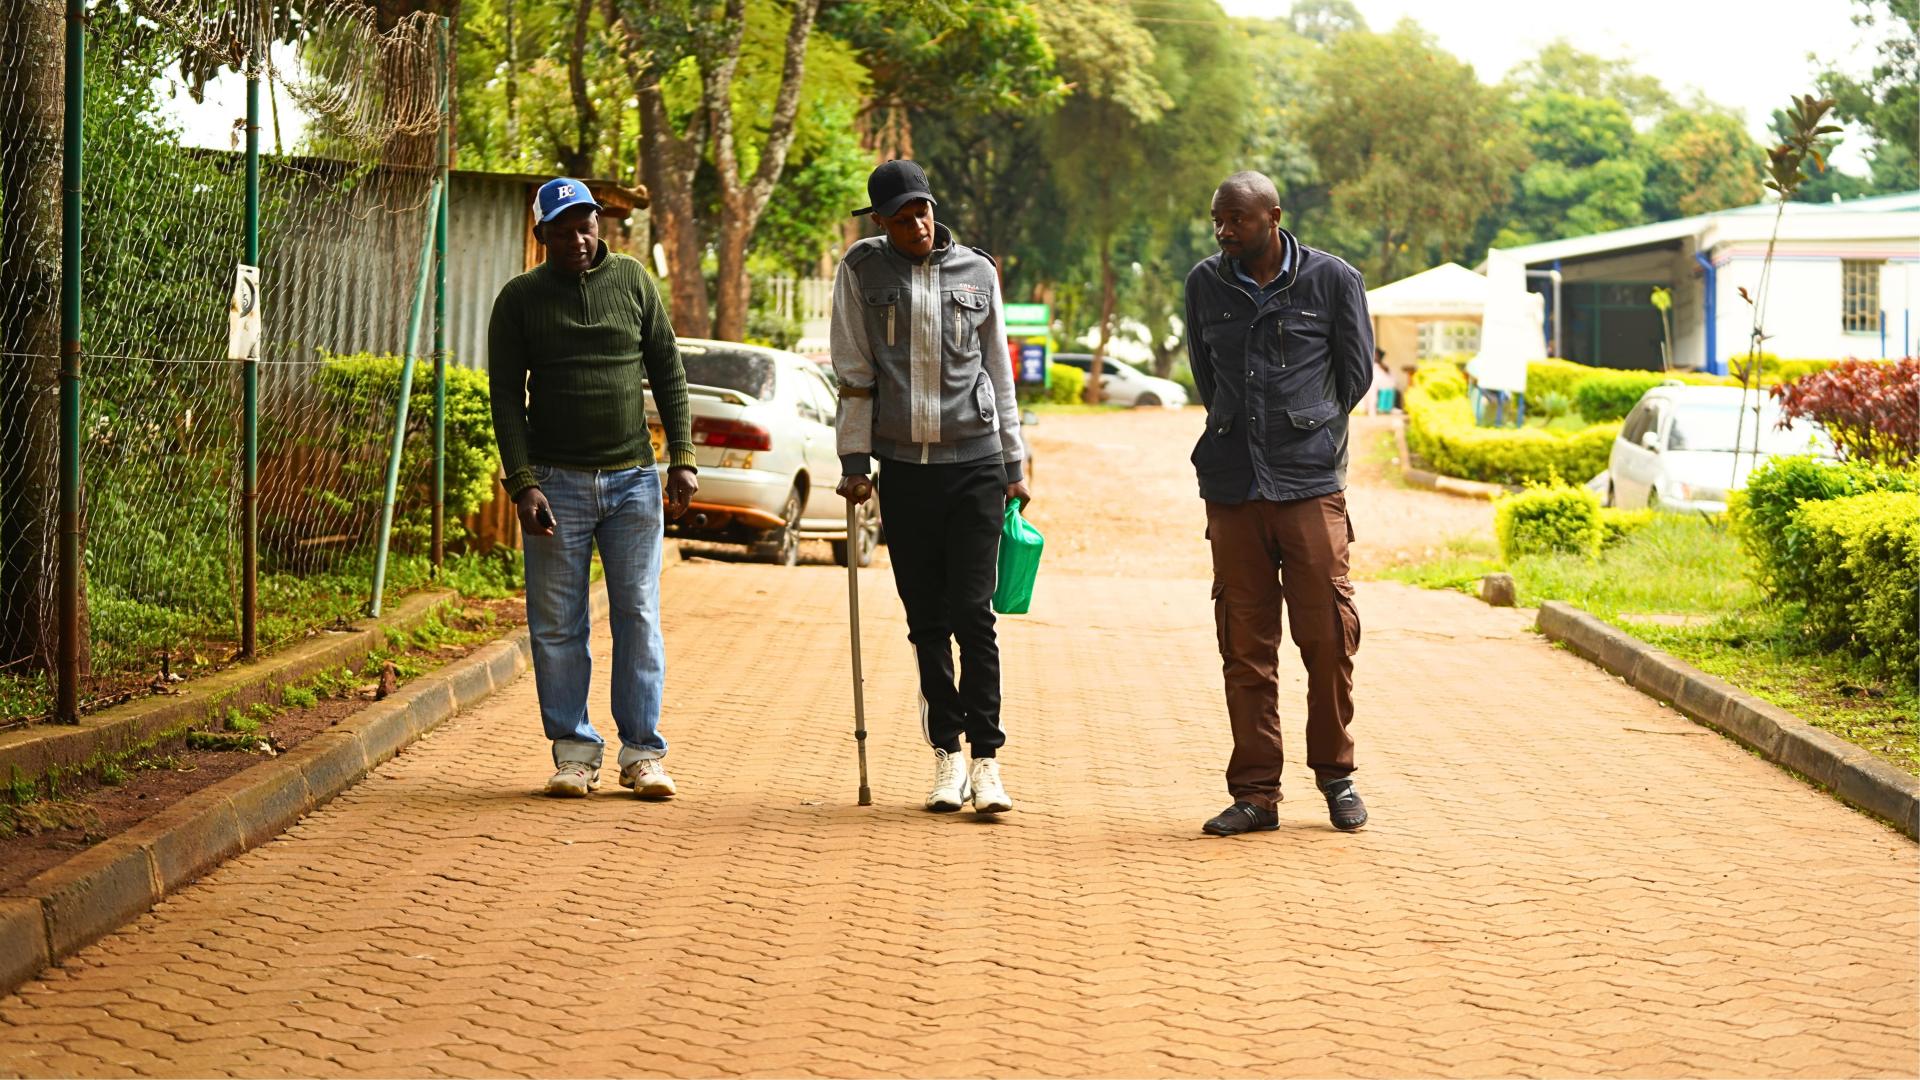 Treatment of People Who Use Drugs in Kenya: Mburu Michael is flanked by his father (left) and uncle (right) as they arrive at the Karuri medically assisted therapy clinic in Karuri for his take home methadone dose.